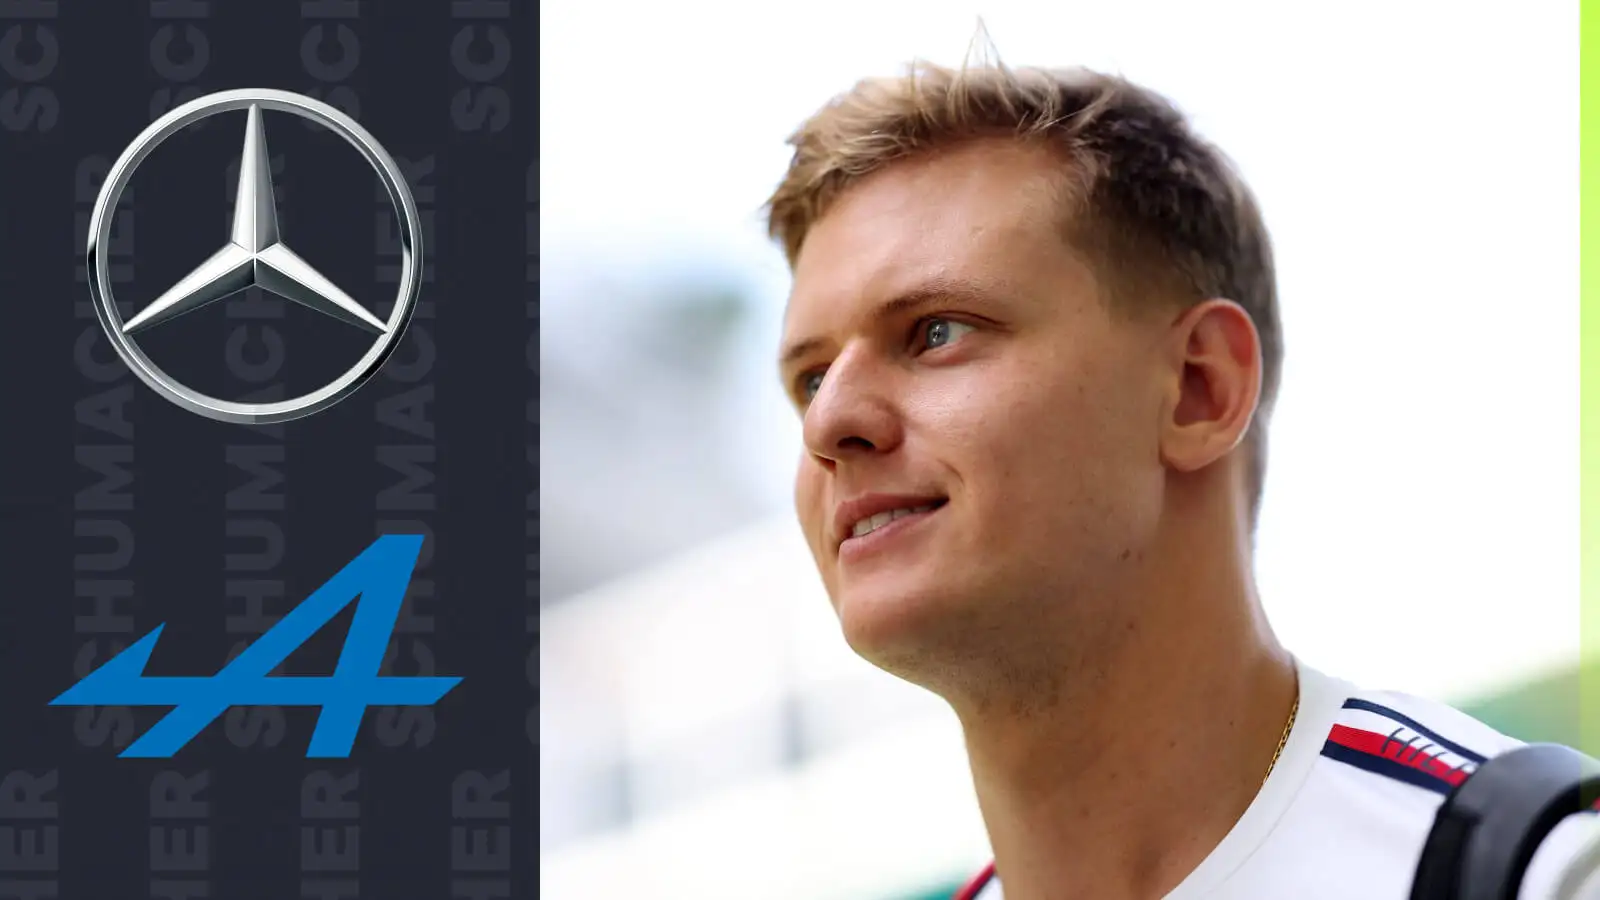 A close-up image of Mick Schumacher with prominent Mercedes and Alpine badges alongside him.